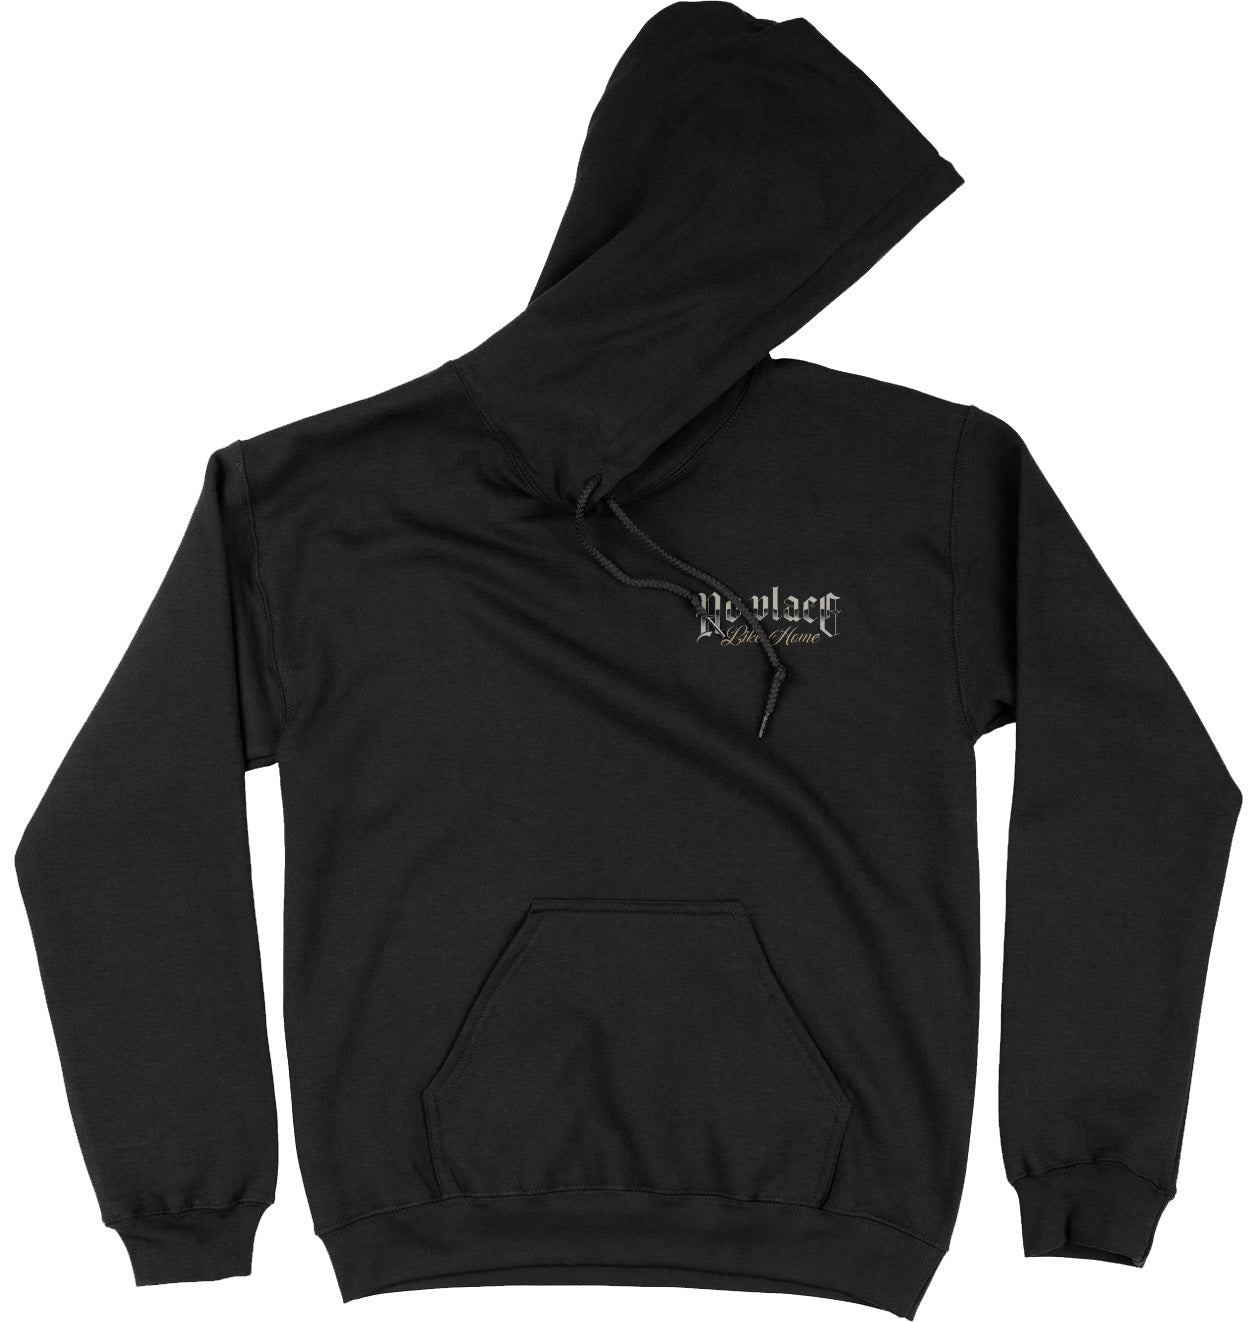 No Place Like Home - Youth and Toddler Hoodie